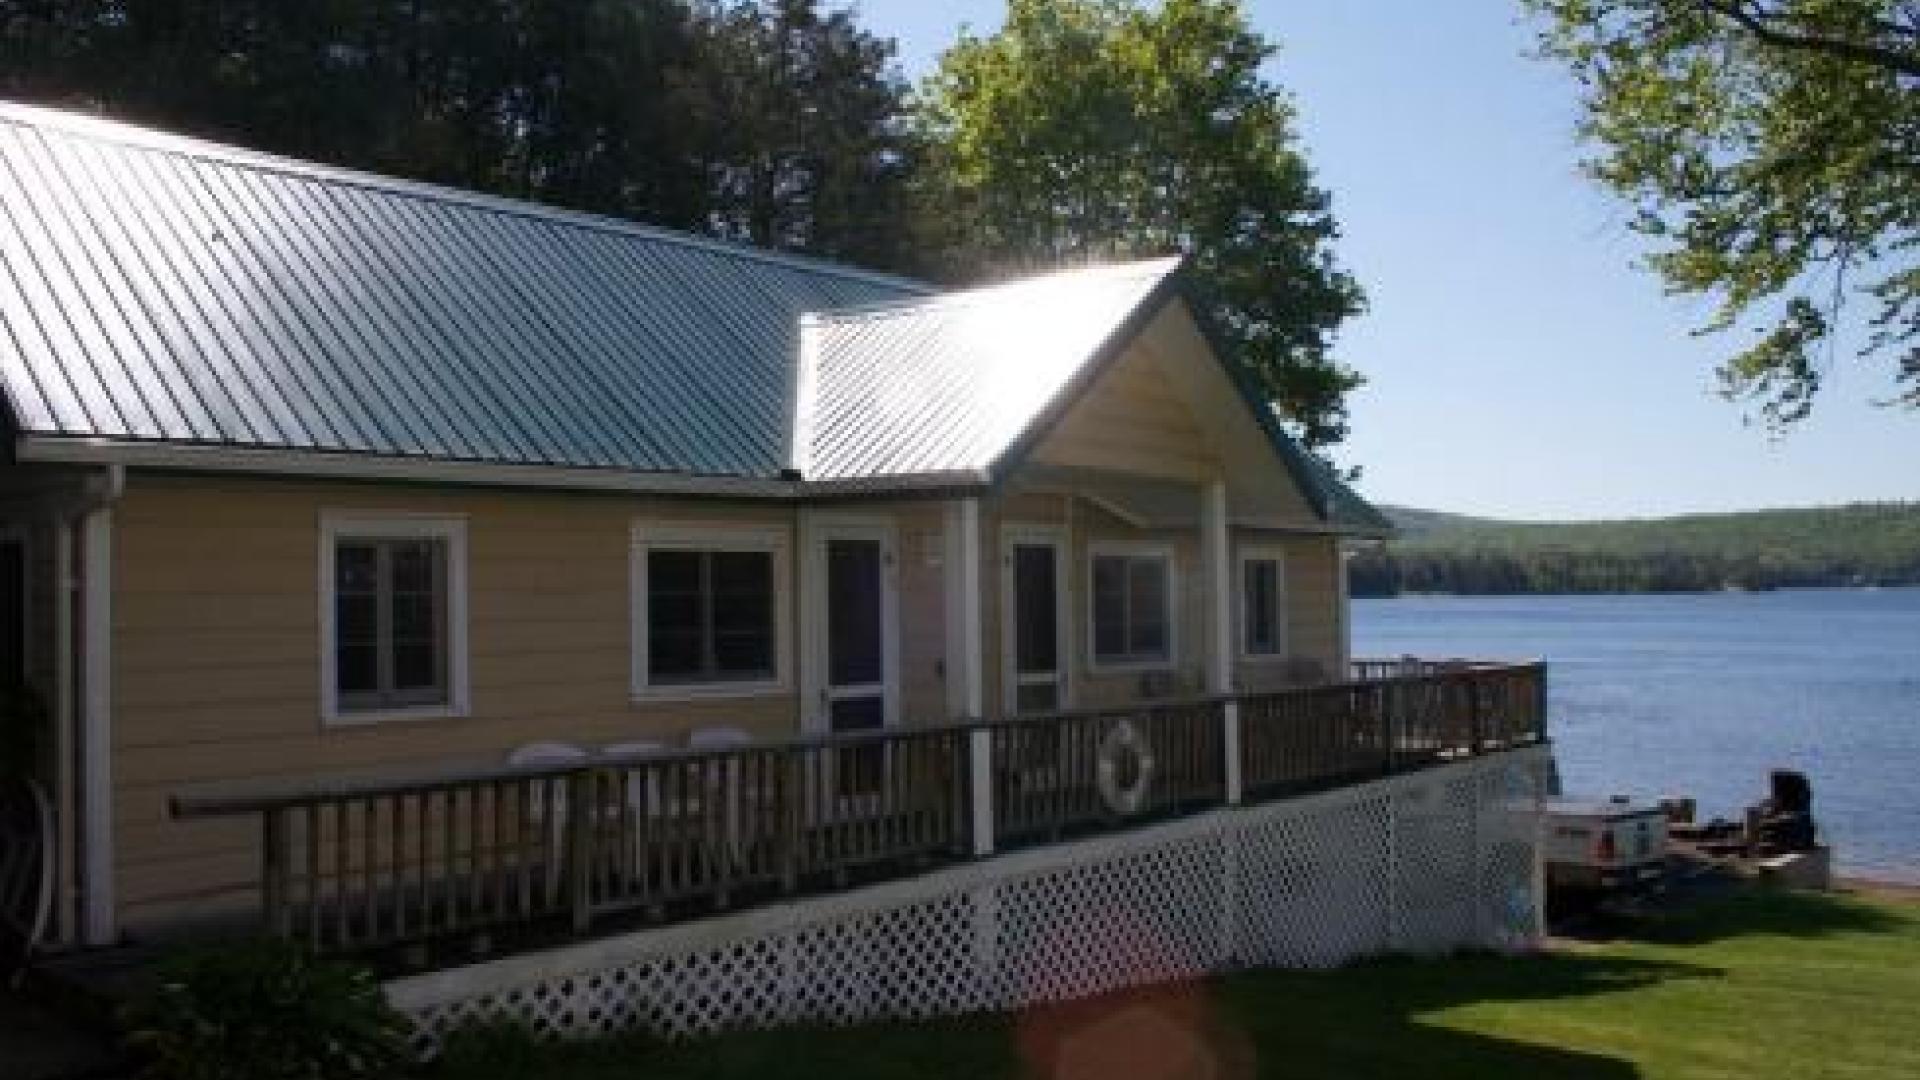 The Schroon Lake Place